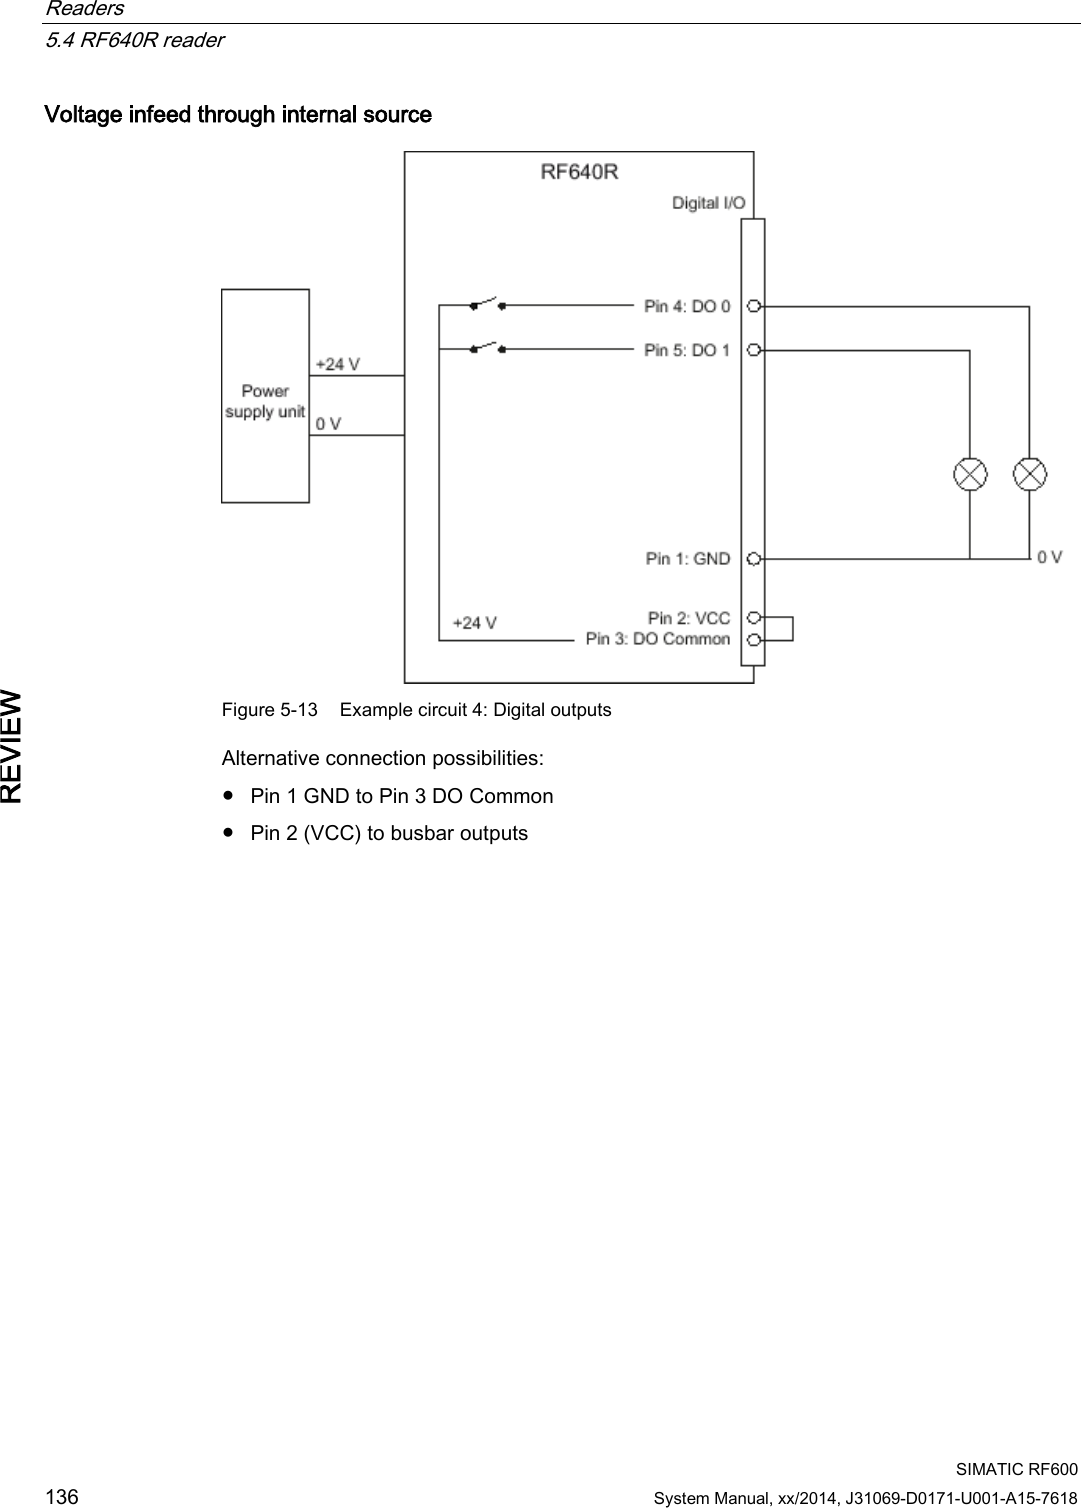 Readers   5.4 RF640R reader  SIMATIC RF600 136 System Manual, xx/2014, J31069-D0171-U001-A15-7618 REVIEW Voltage infeed through internal source  Figure 5-13 Example circuit 4: Digital outputs Alternative connection possibilities: ● Pin 1 GND to Pin 3 DO Common ● Pin 2 (VCC) to busbar outputs 